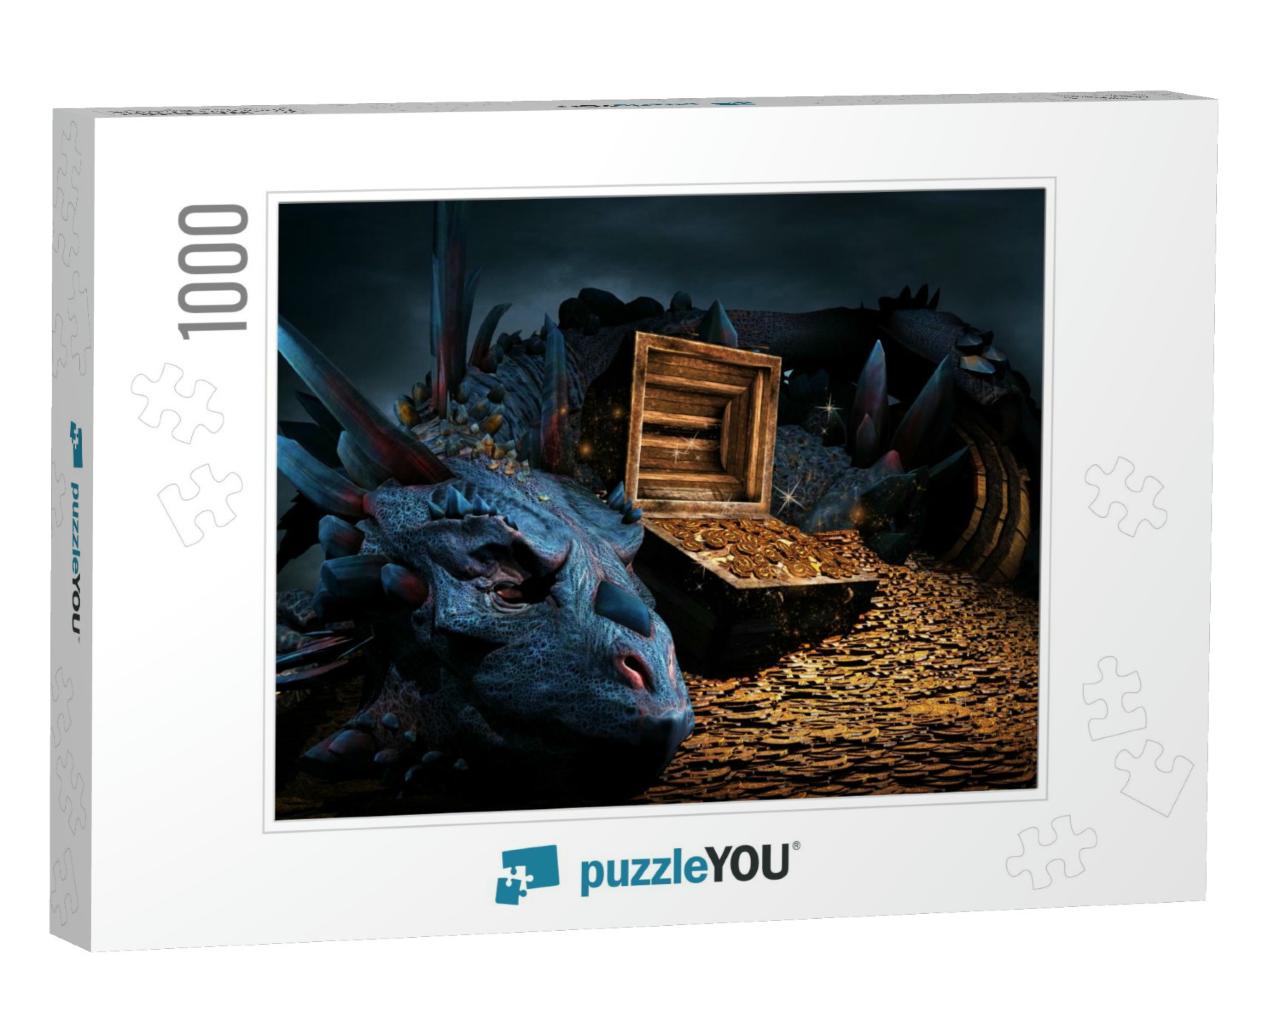 Fantasy Scene with Blue Dragon, Treasure Chest & Pile of... Jigsaw Puzzle with 1000 pieces